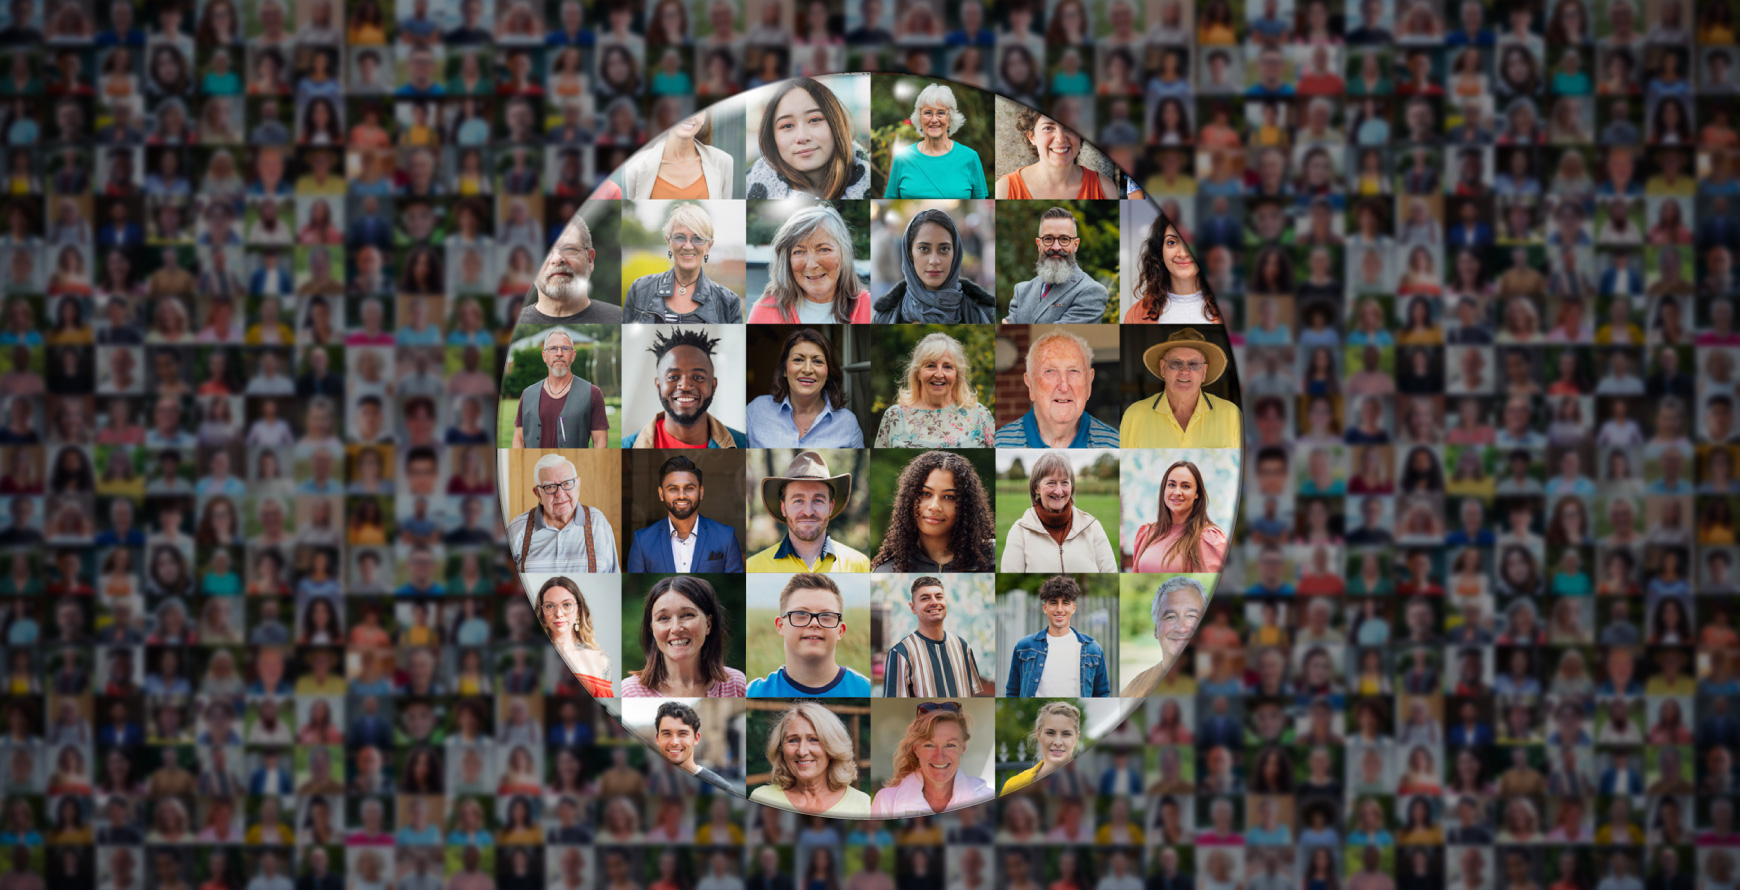 Collage of people with a clear lens centered above